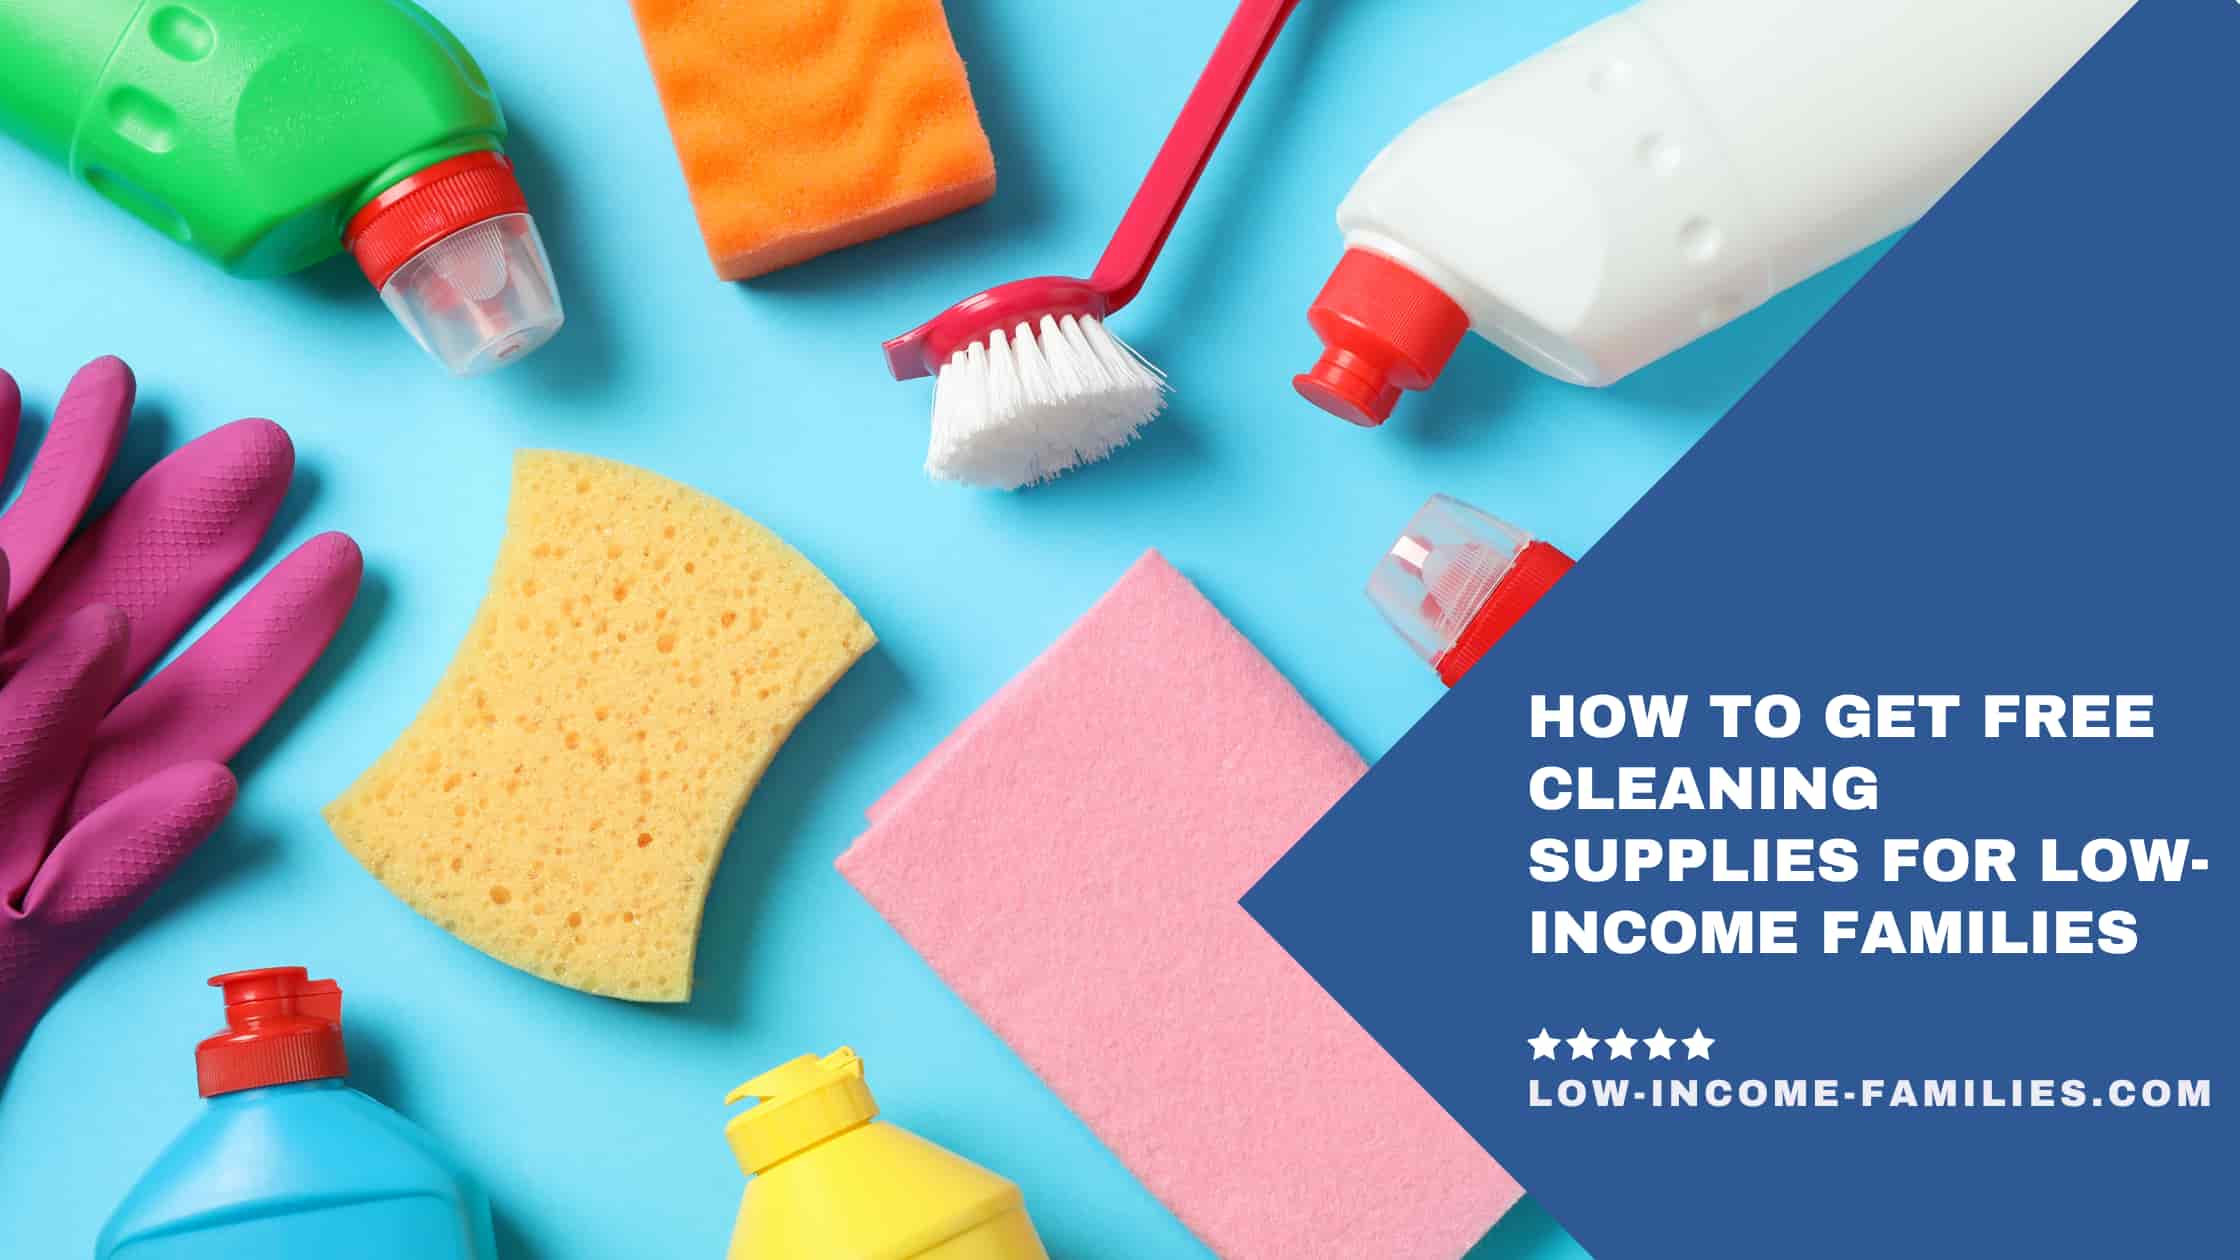 How to Get Free Cleaning Supplies for Low-Income Families